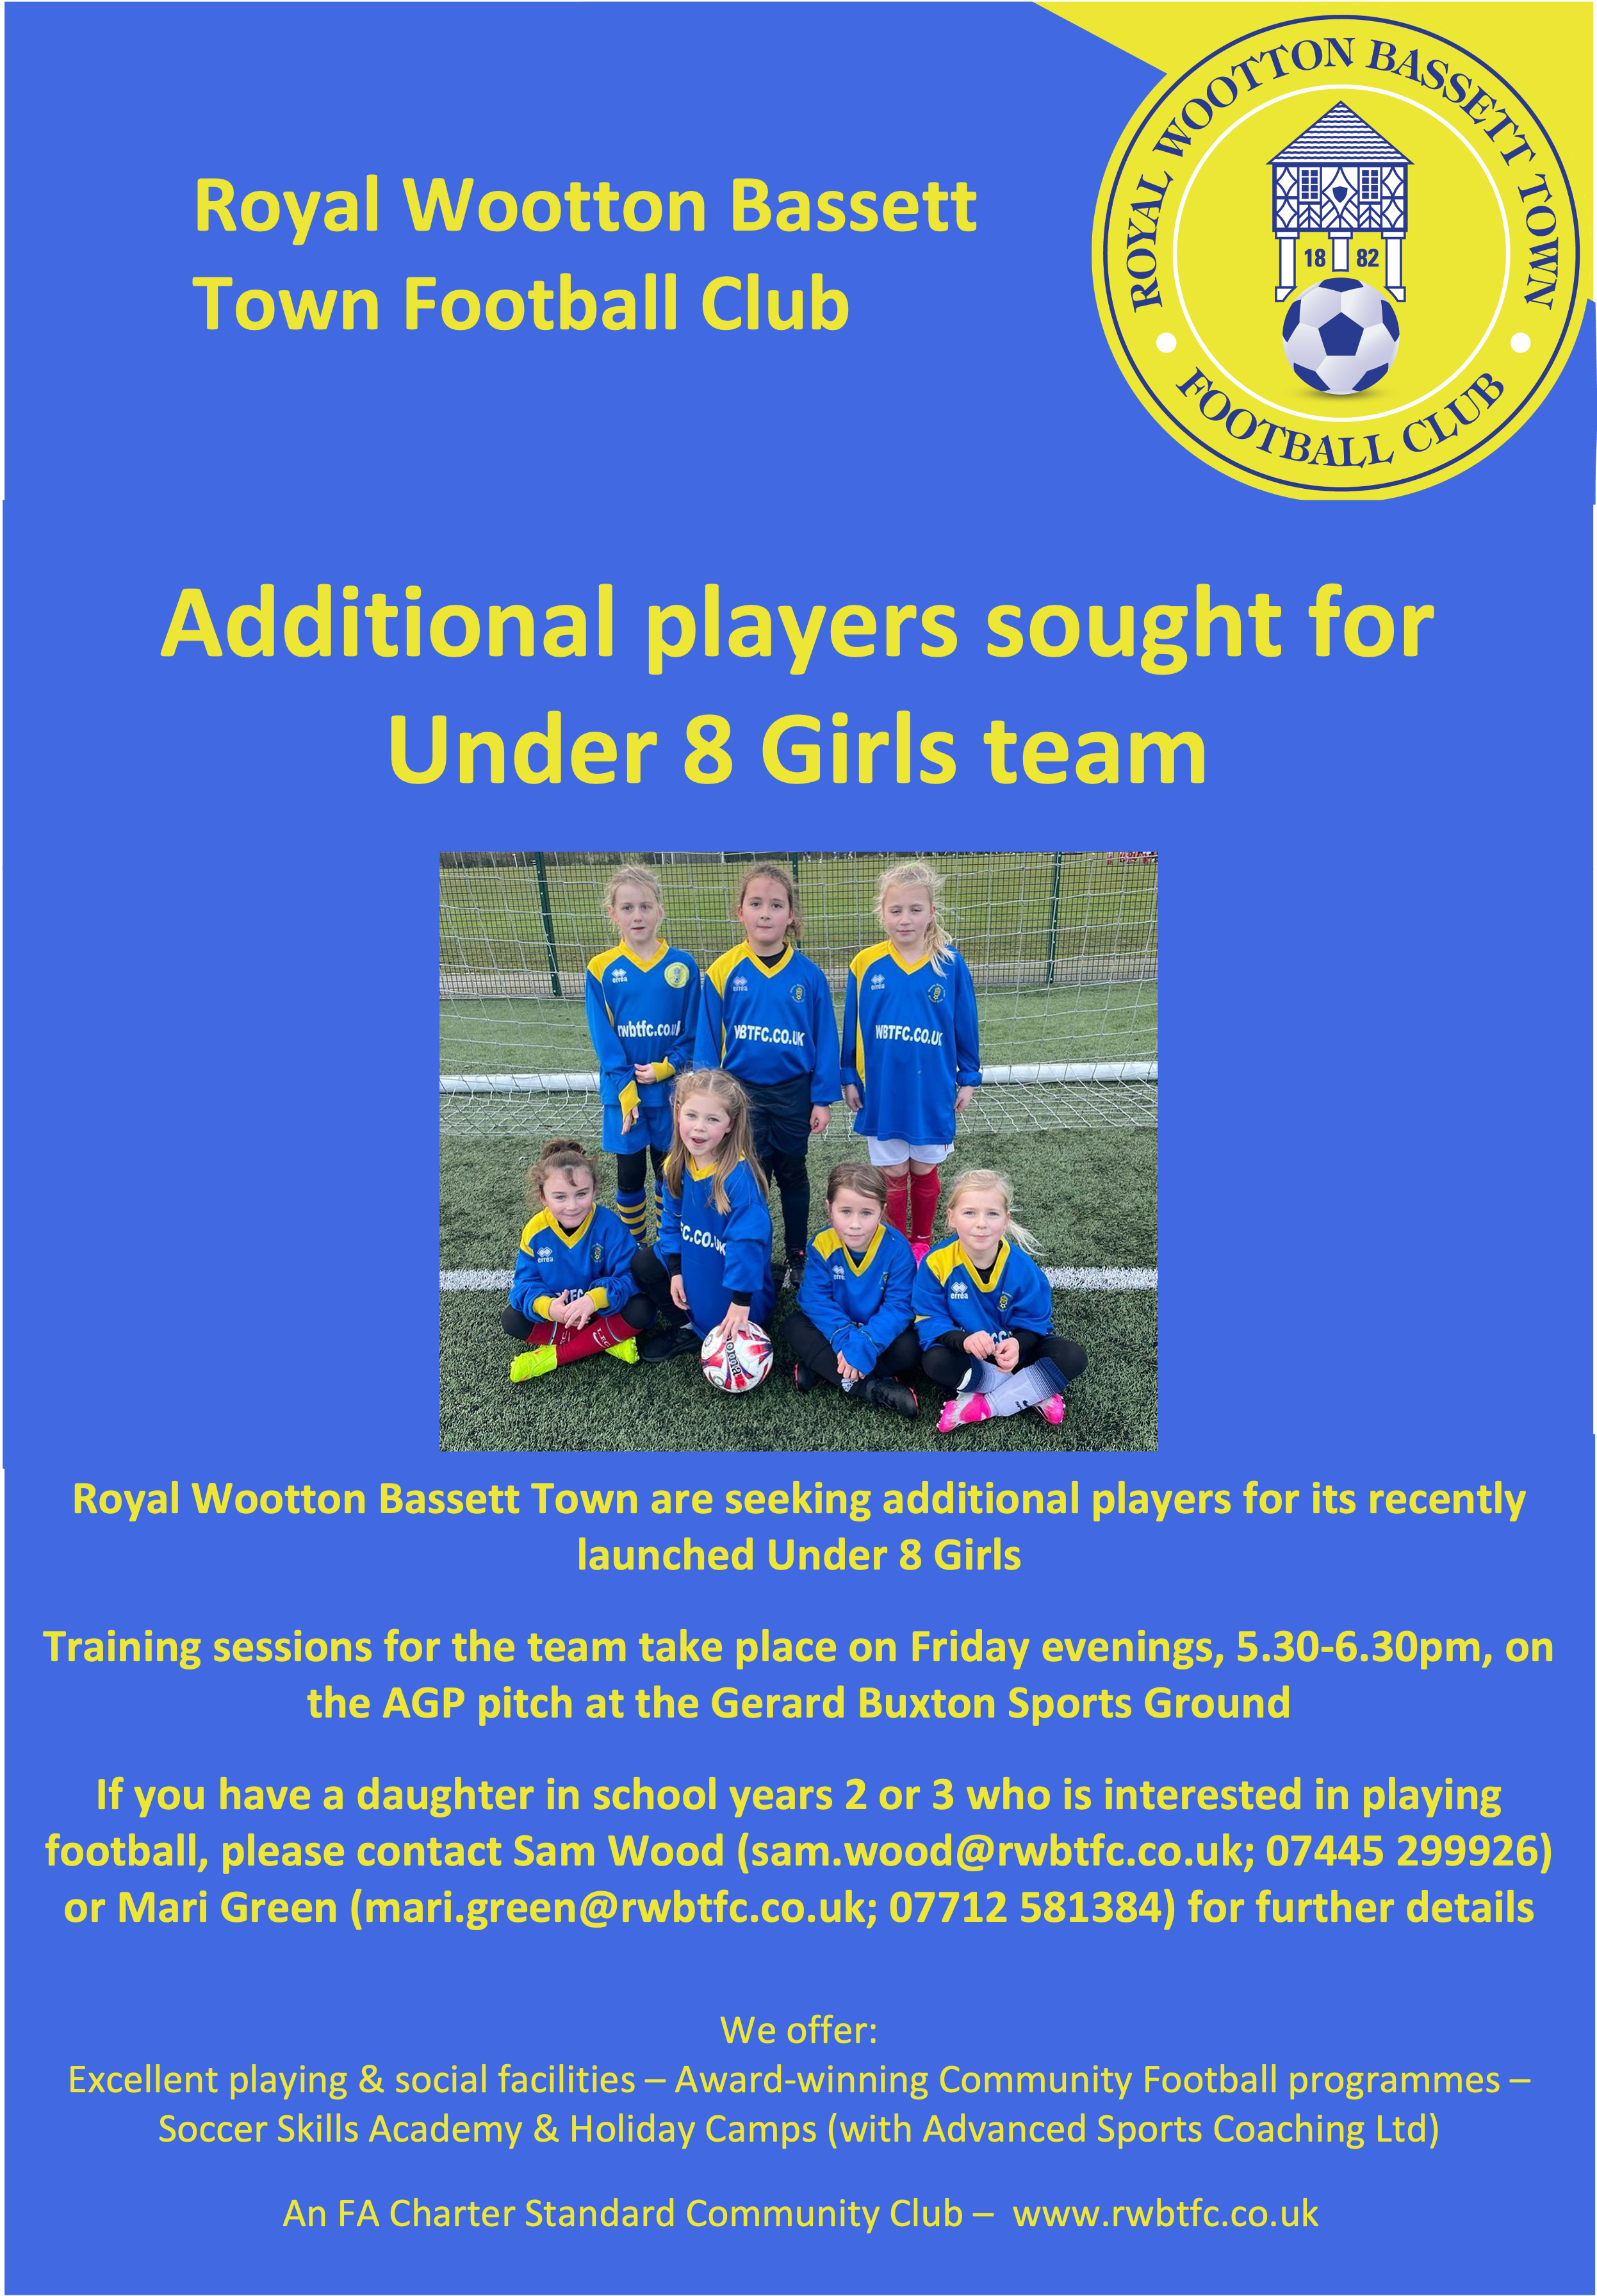 Additional players sought for new Under 8 Girls team (Credit: )